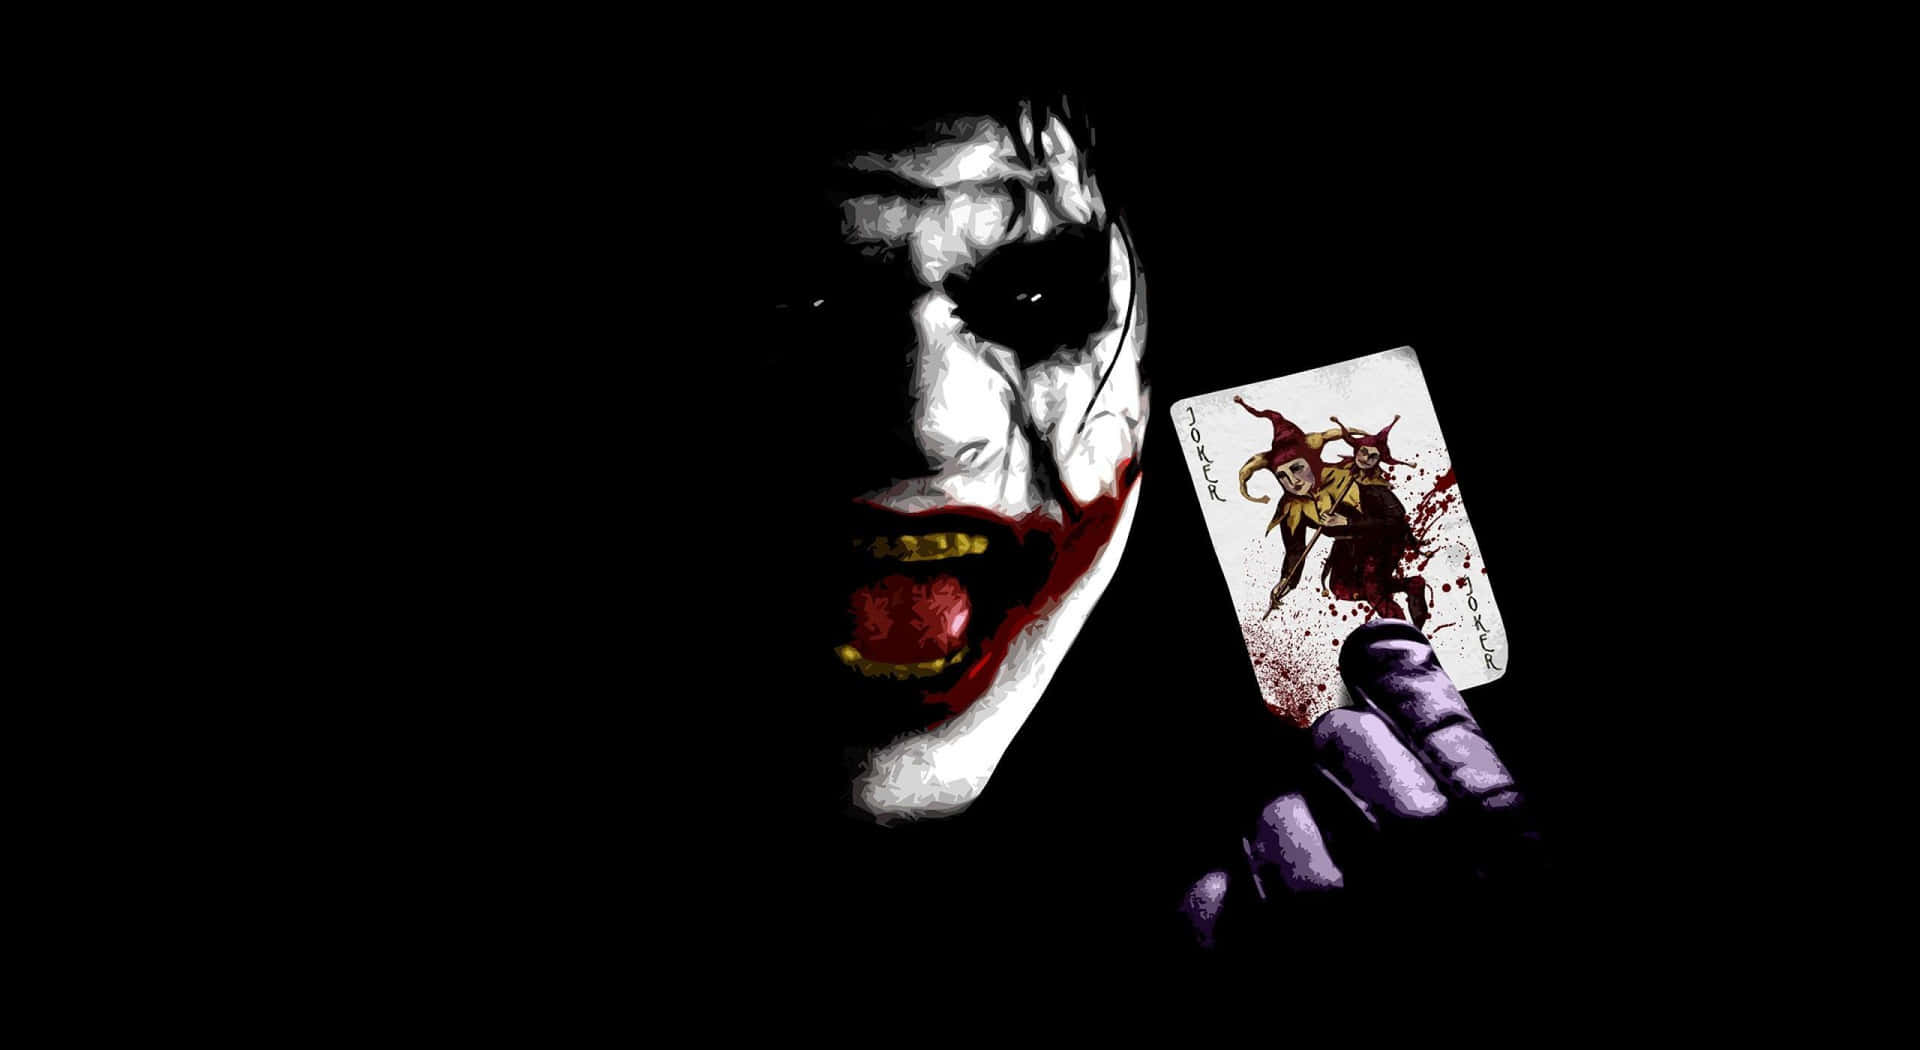 The Joker Laughing Maniacally In Darkness Background